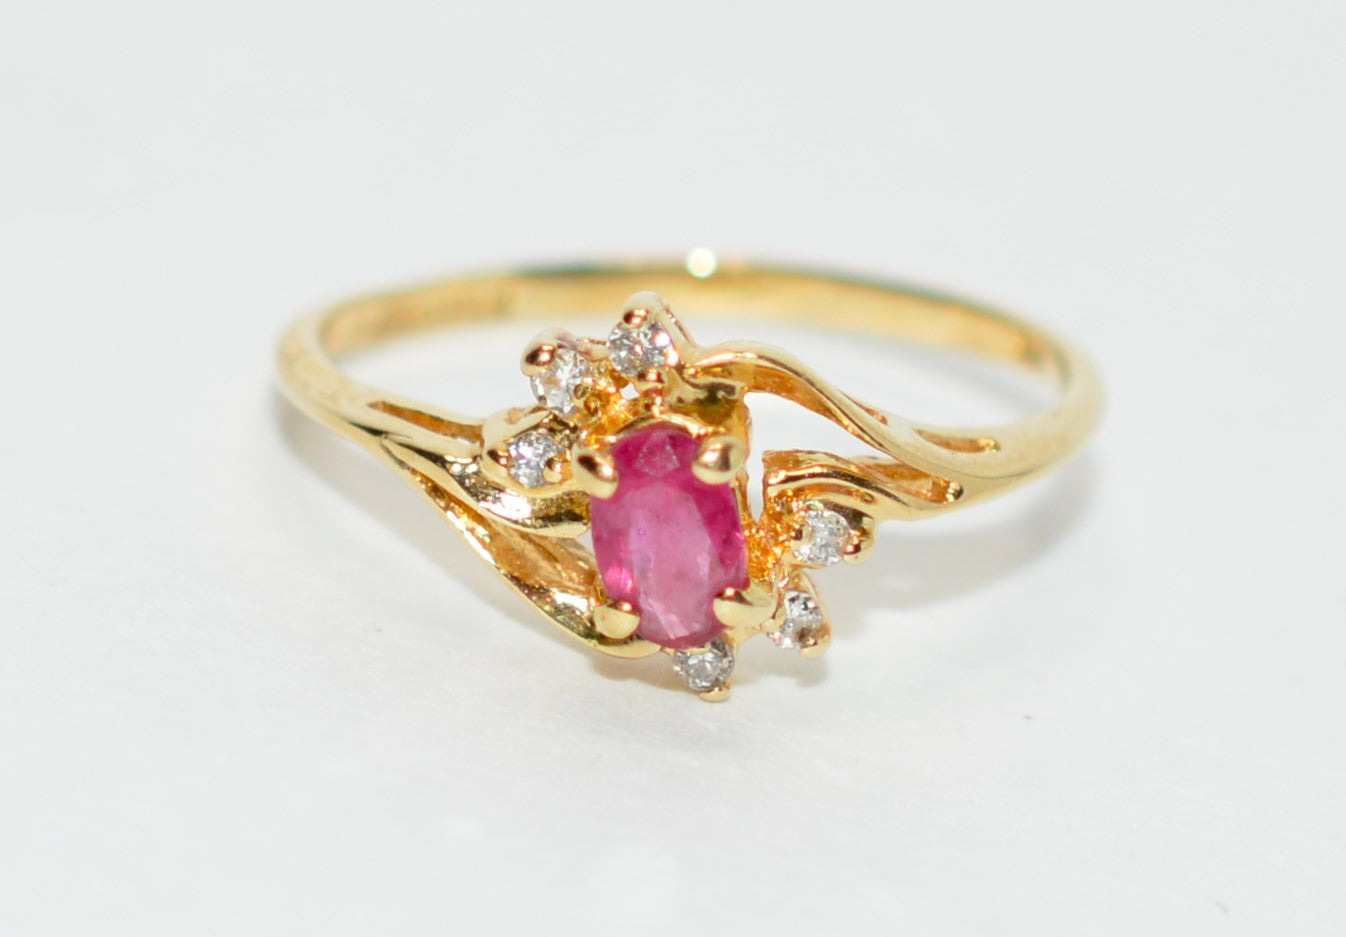 Natural Ruby & Diamond Ring 14K Solid Gold .29tcw Engagement Ring Ruby Gemstone Red Birthstone Jewellery Jewelry Fine Promise Bridal Vintage